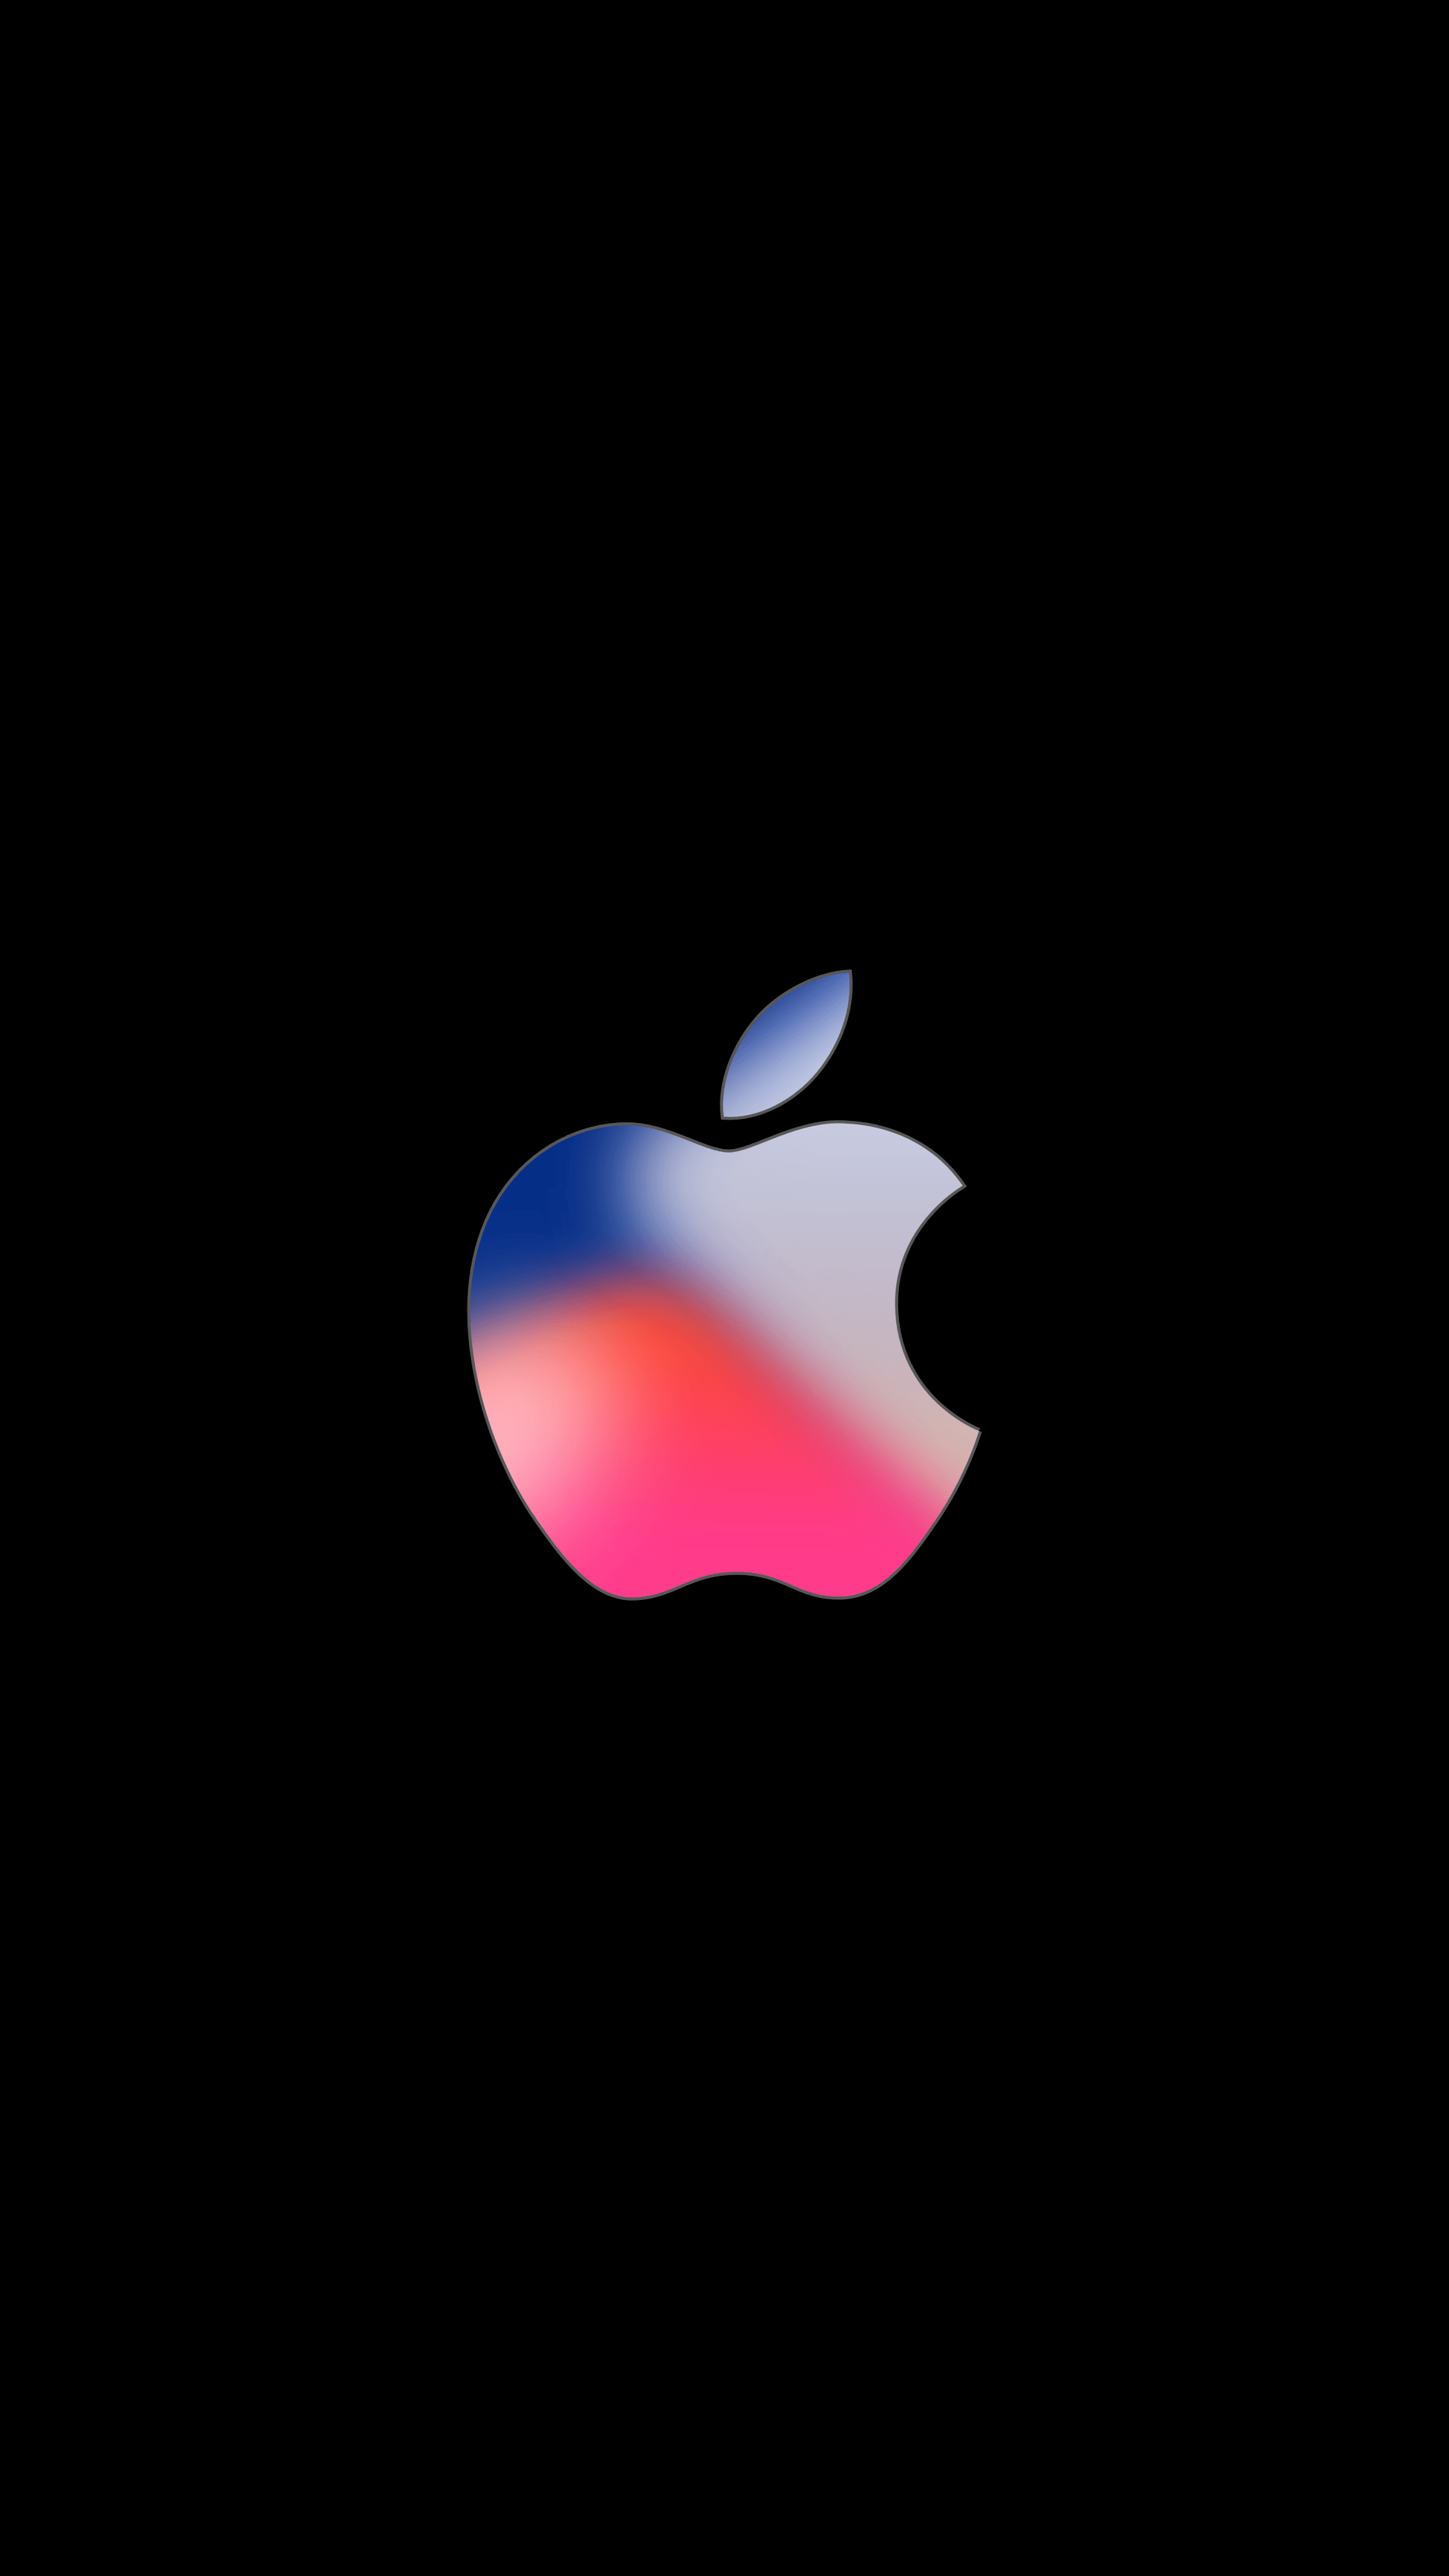 Apple iPhone Theme 4k Wallpapers - Wallpaper Cave